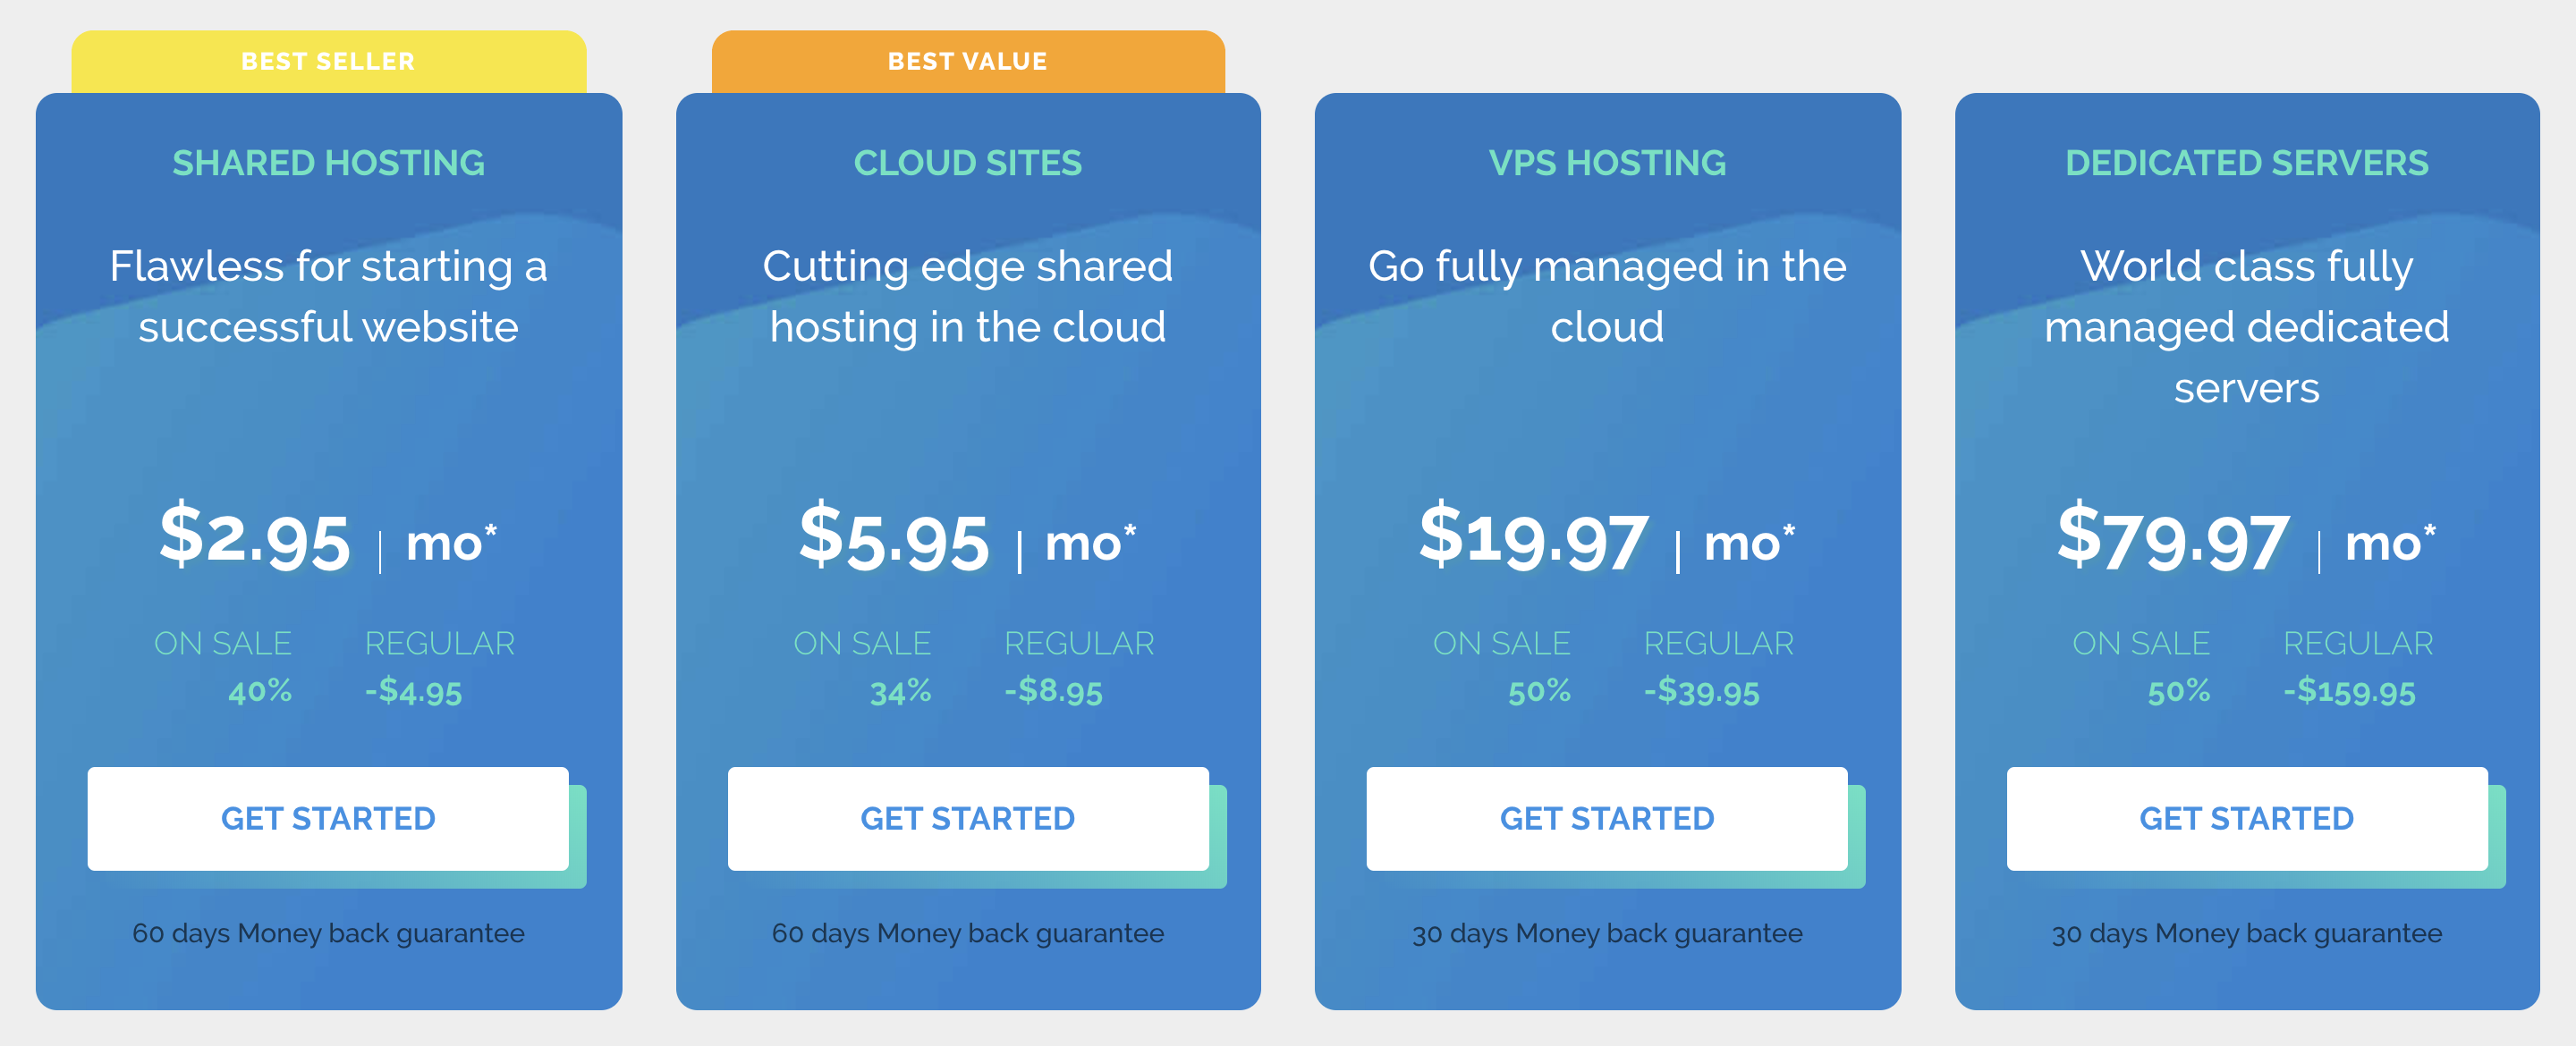 TMDHosting Pricing Review